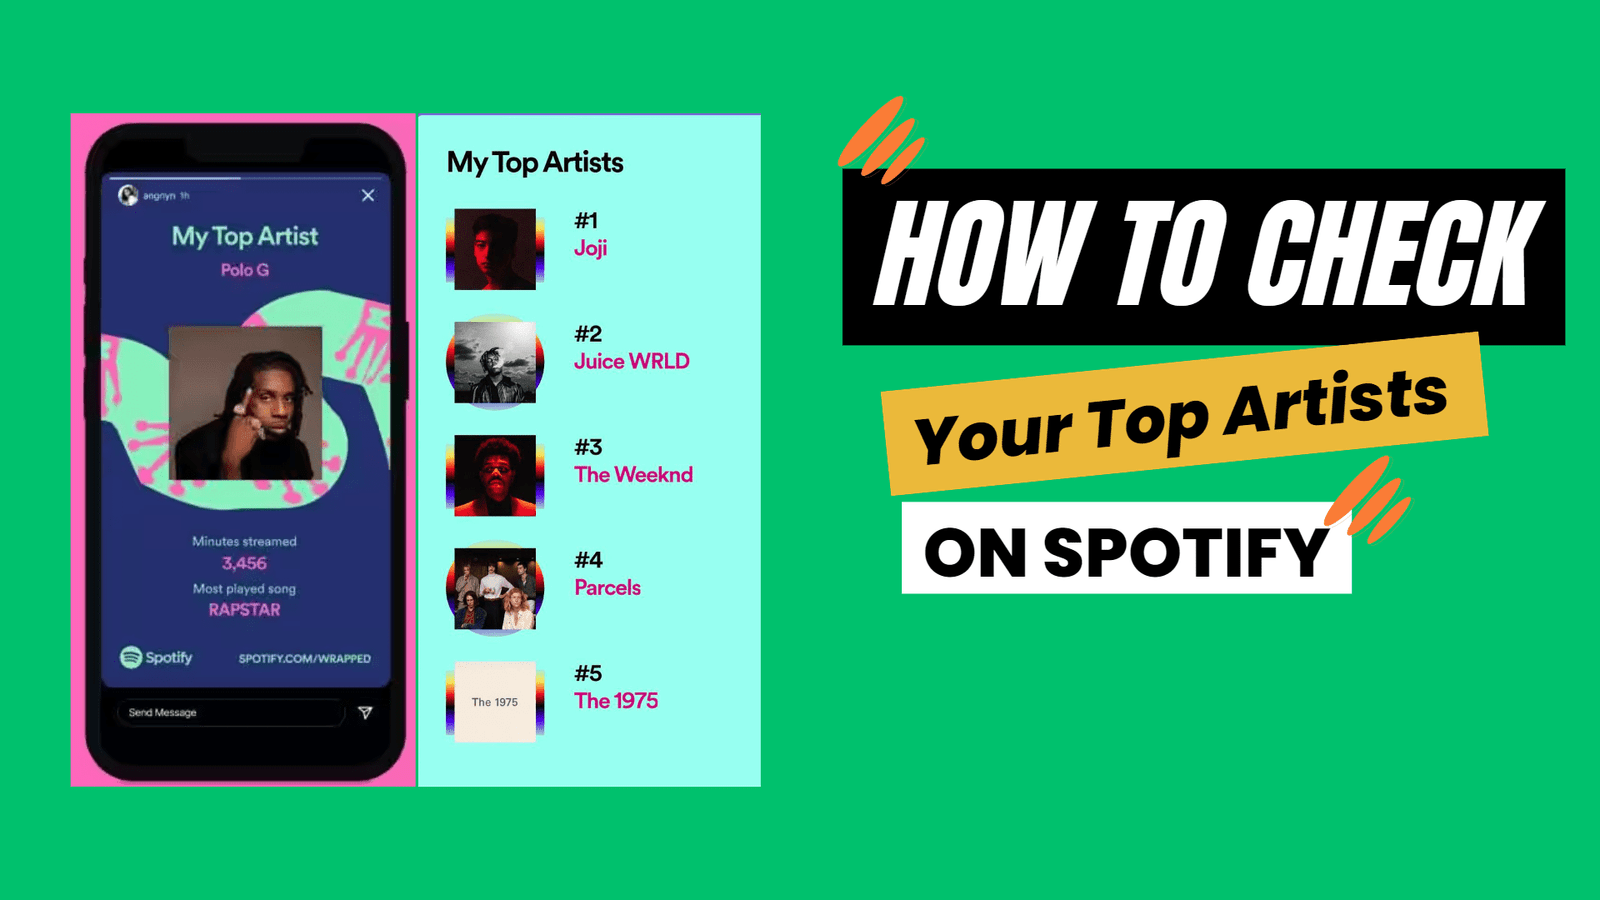 How to check your top artists on Spotify